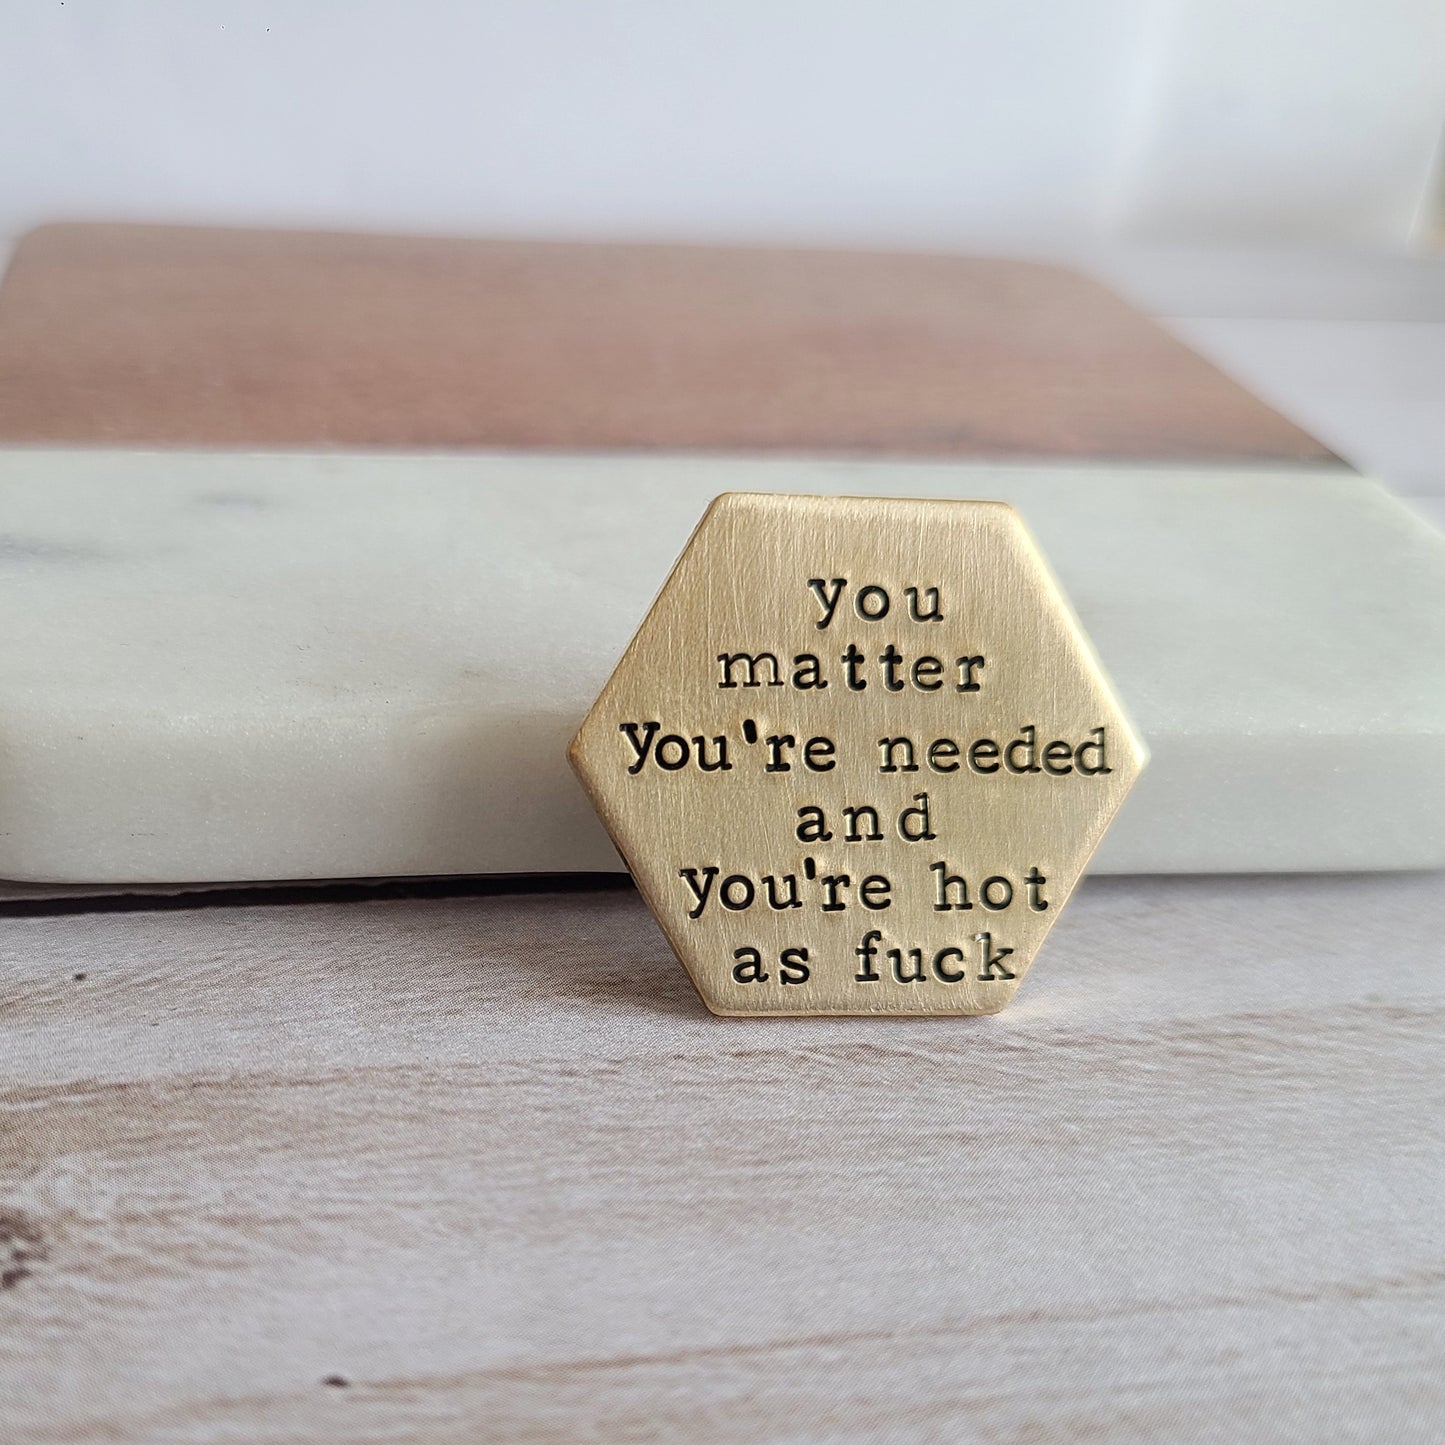 You Matter You're Needed & You're Hot As Fuck, Self Love Affirmations Pin, Trendy Fashion Accessory, Gold Brass Collar Pin, Know Your Worth